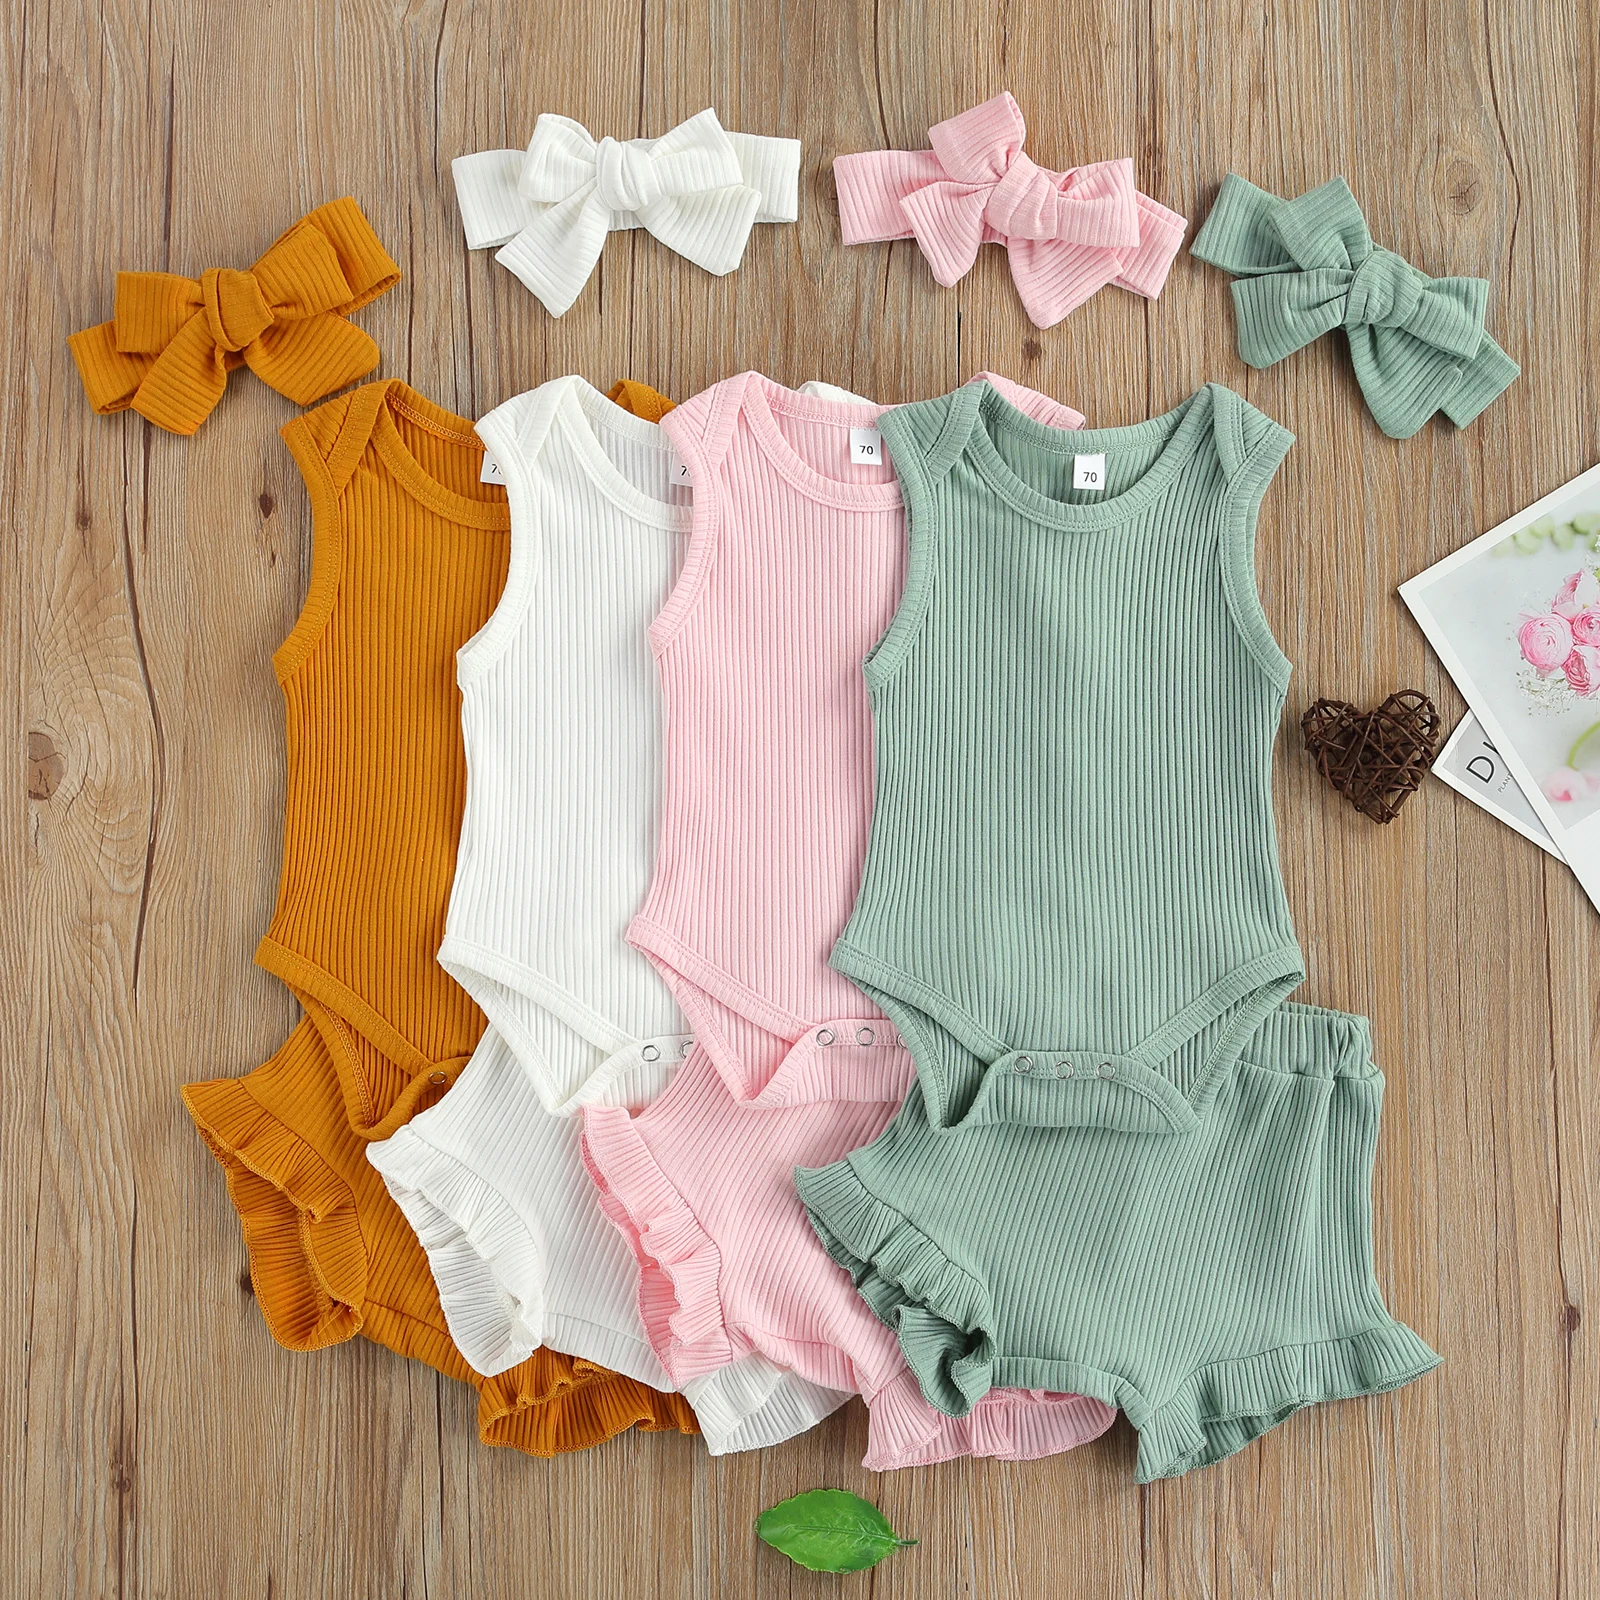 Summer 2021 Kids Baby Girls Clothes Set Cotton Ribbed Solid Color Sleeveless Romper+Shorts+Headband for Toddler Infant Costumes Baby Clothing Set luxury